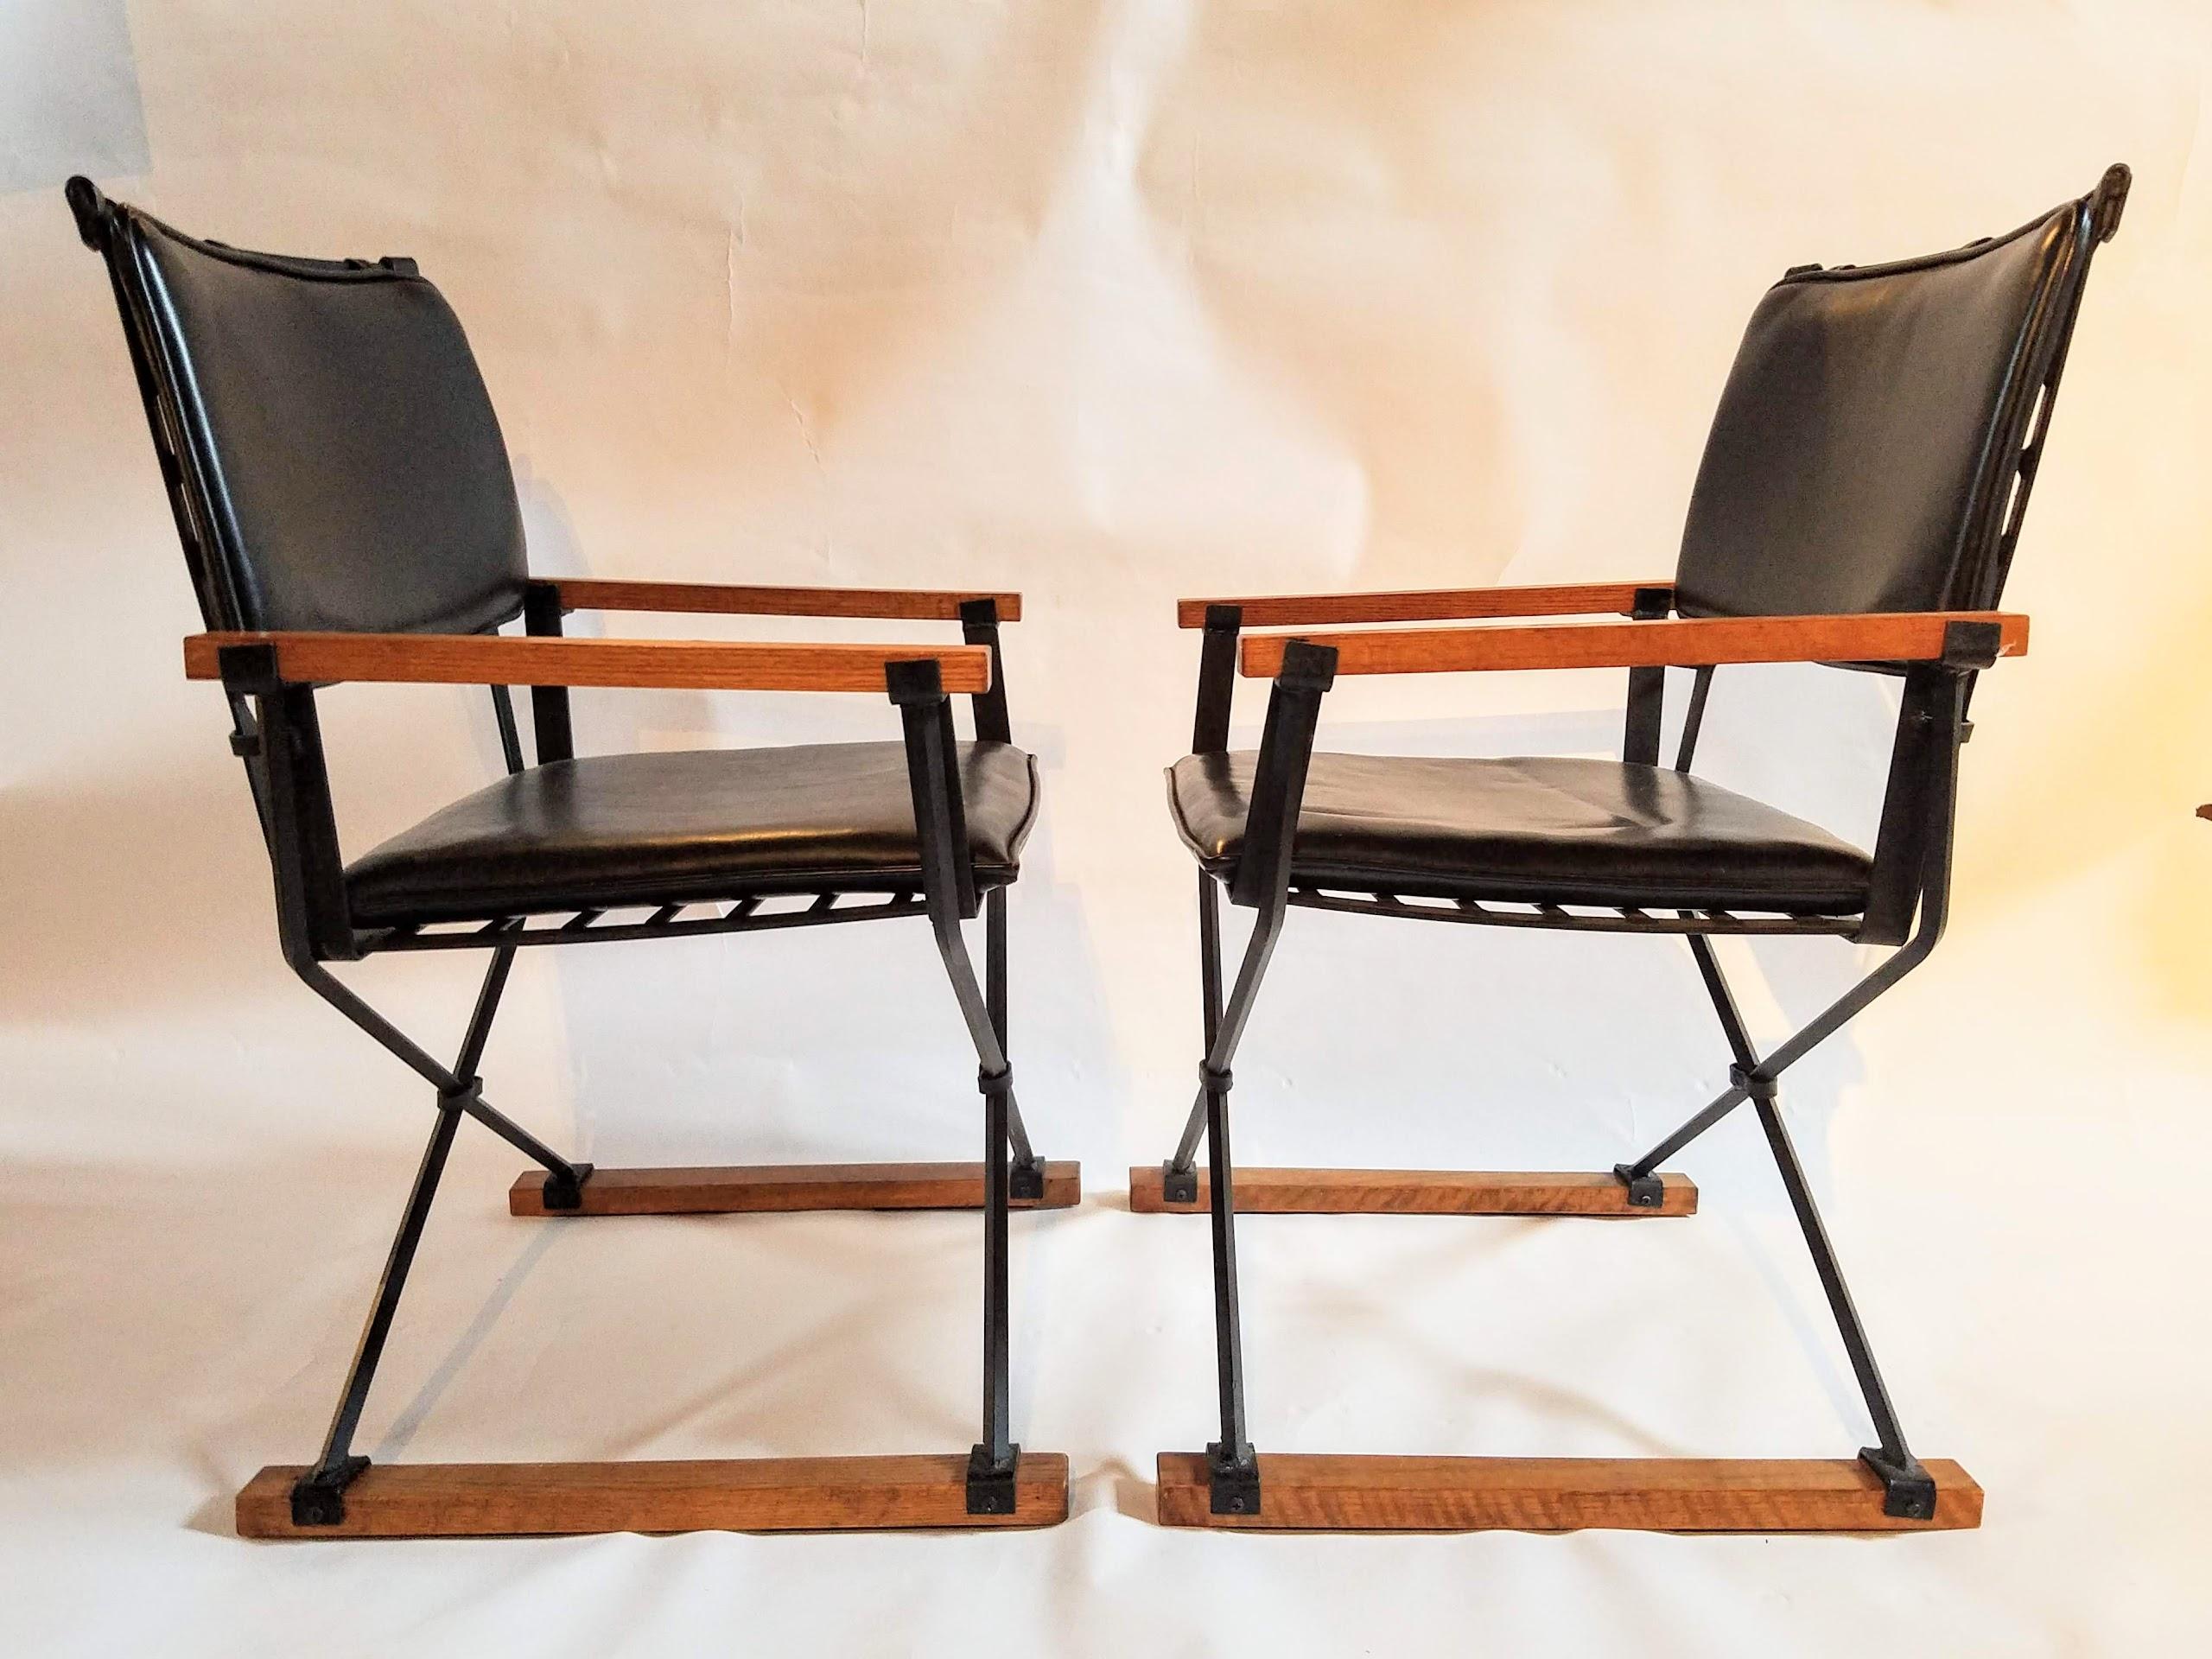 Cleo Baldon unusual pair of Campaign chairs manufactured by Terra in the mid-1960s thru the mid-1970s.
The wrought iron chairs are lacquered in their original black color with fumed oak strips and clip on back cushions.
This pair of chairs closely